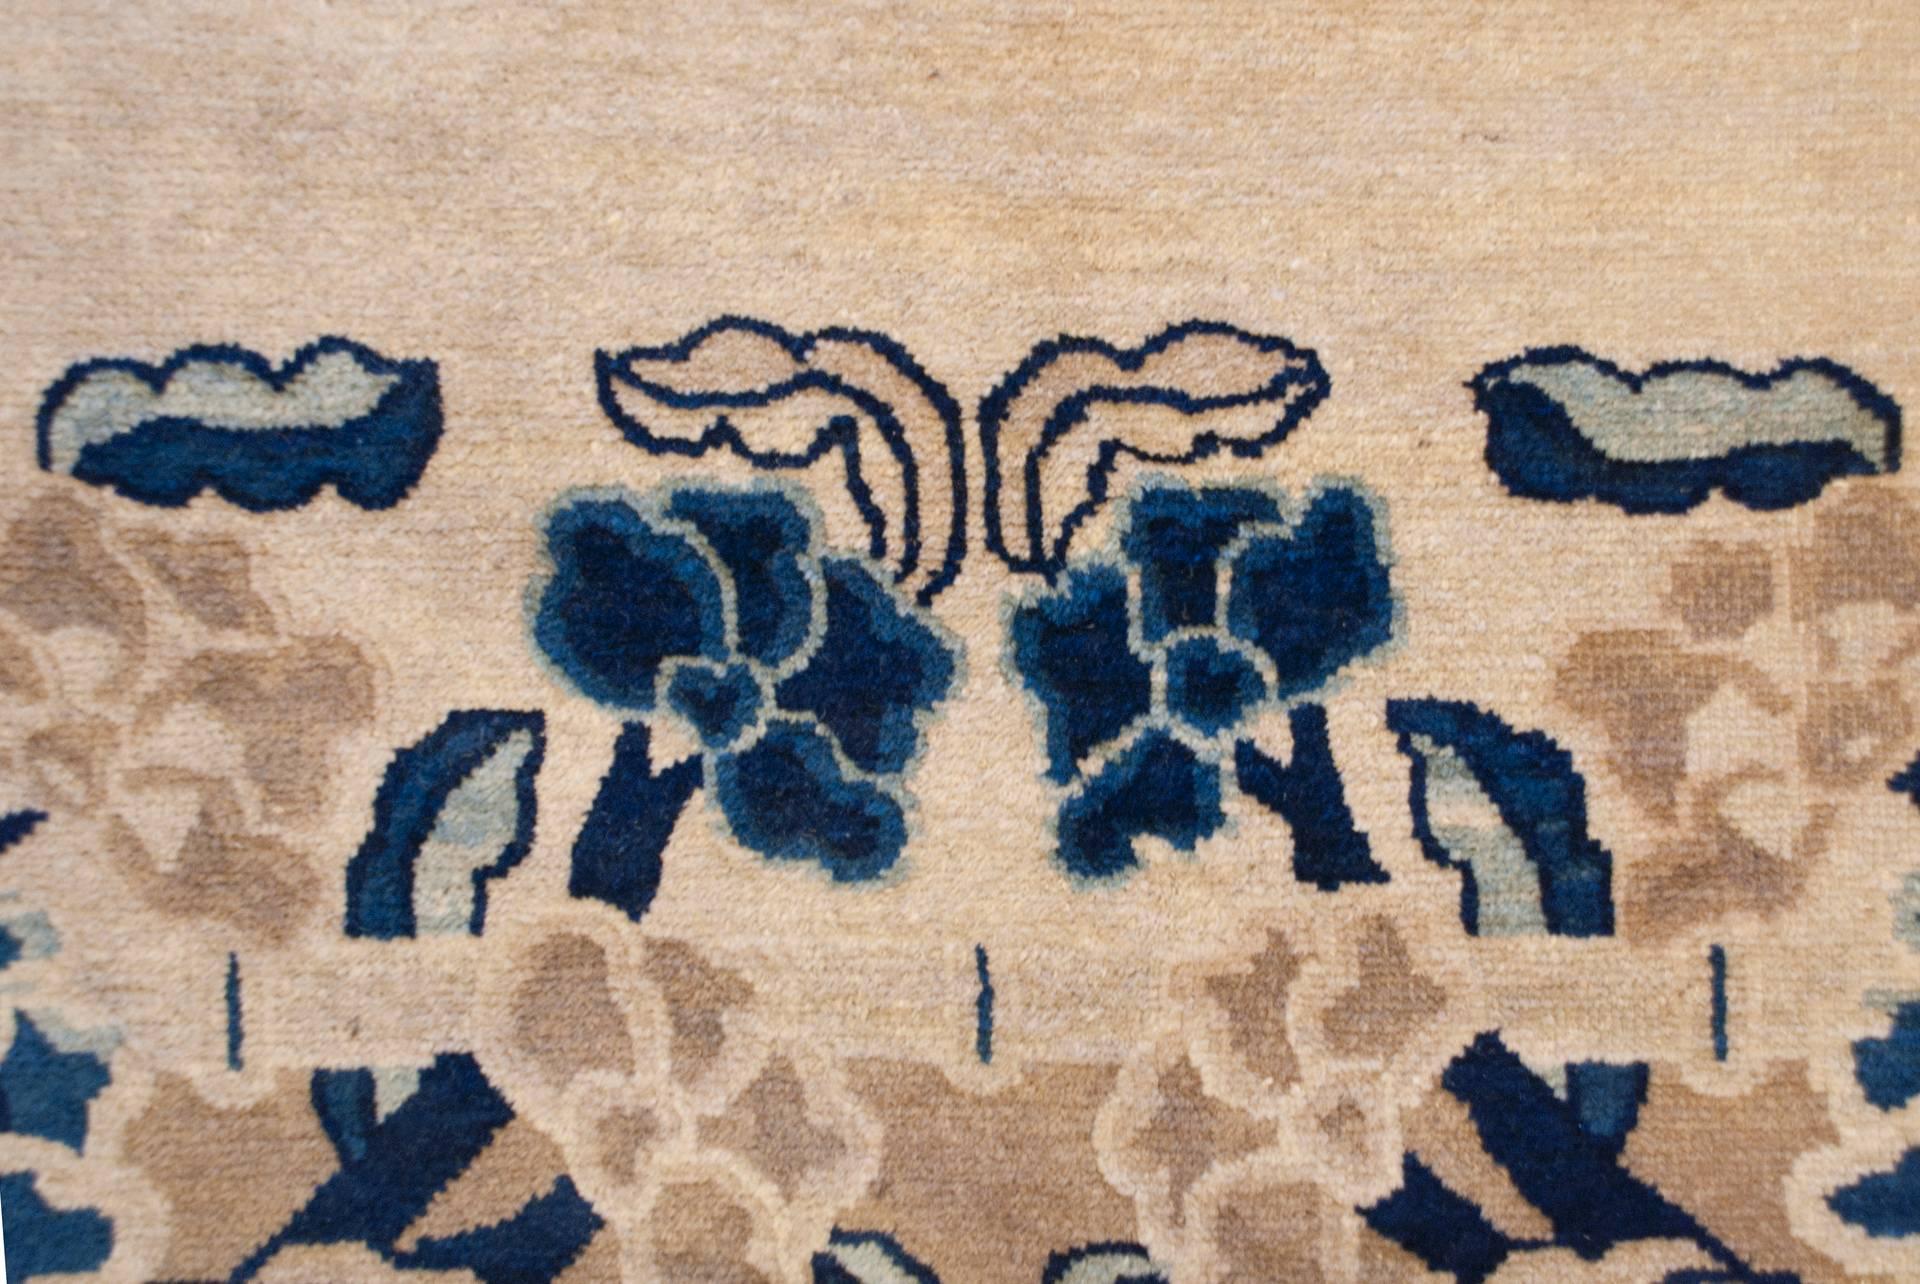 A fascinating mid-19th century Chinese Peking rug with a whimsical pattern of intertwining blossoming tree peonies with birds nestled among the branches, all woven in light and dark indigo, and undyed natural wool in cream tones. The border is